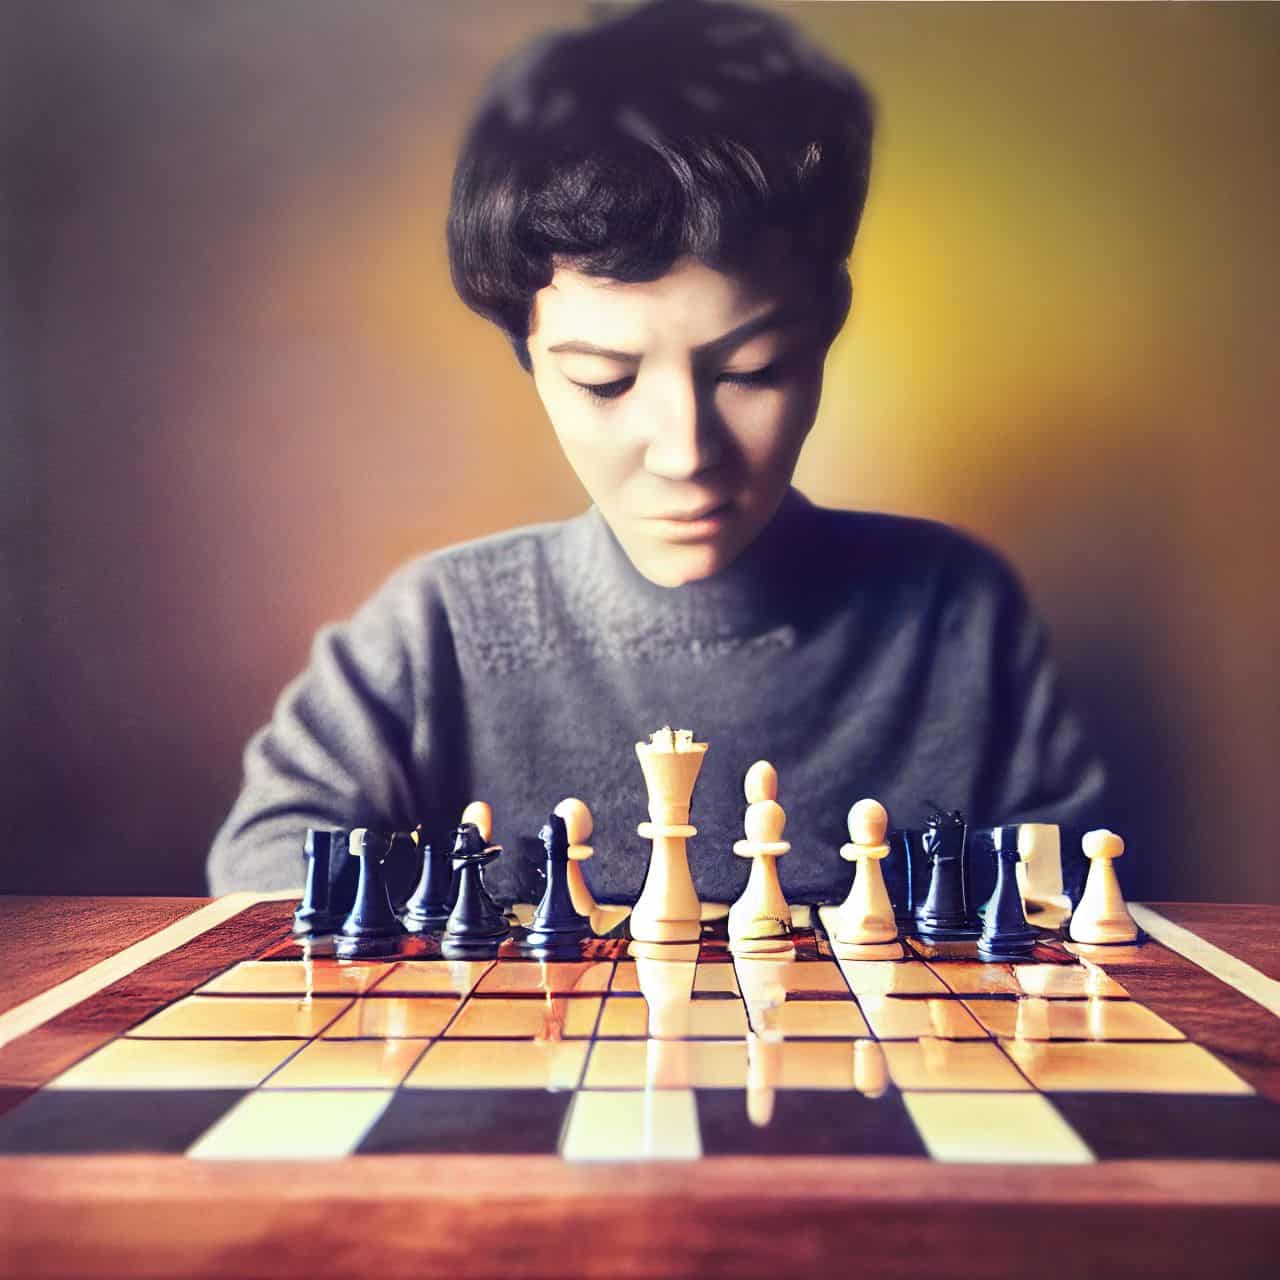 How To Play With Yourself In Chess.com (BEST Way!) 